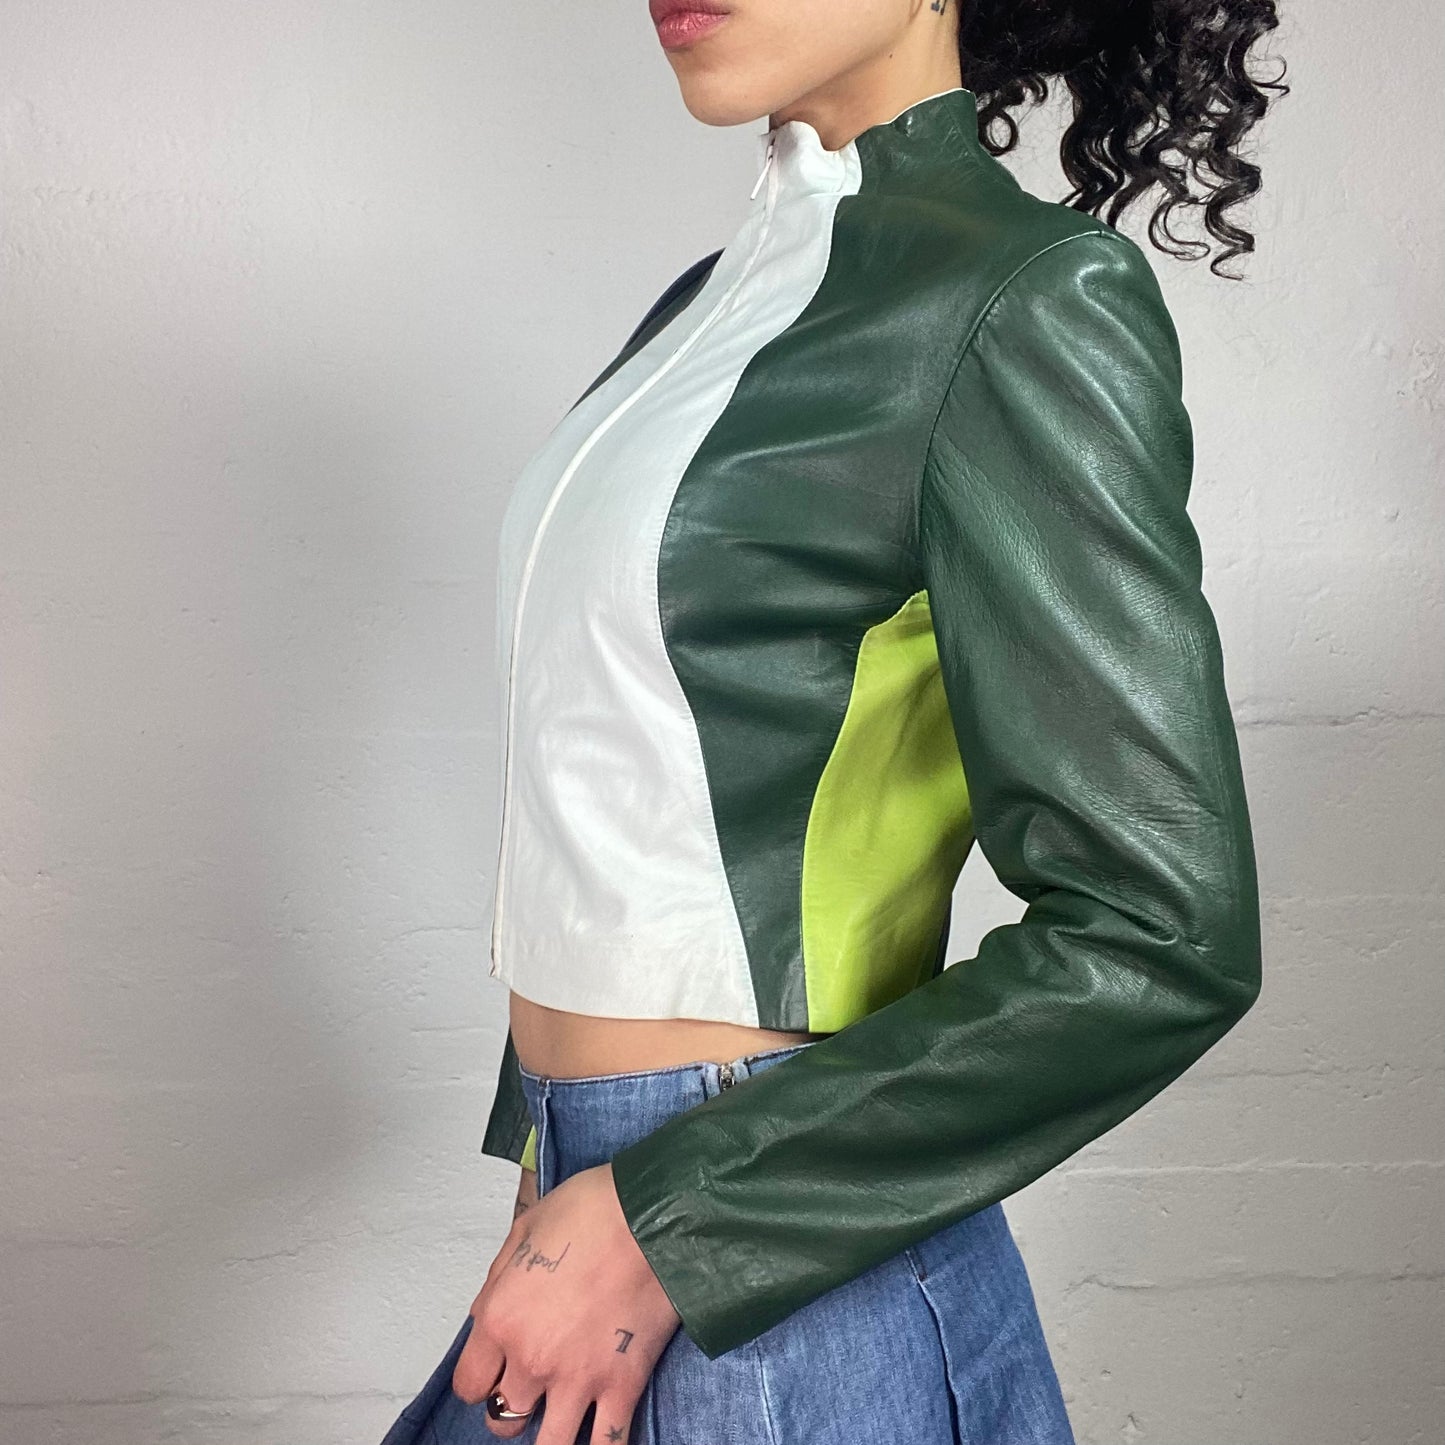 Vintage 2000's Biker Style Fun Green and White Zip Up Cropped Leather Jacket (S)